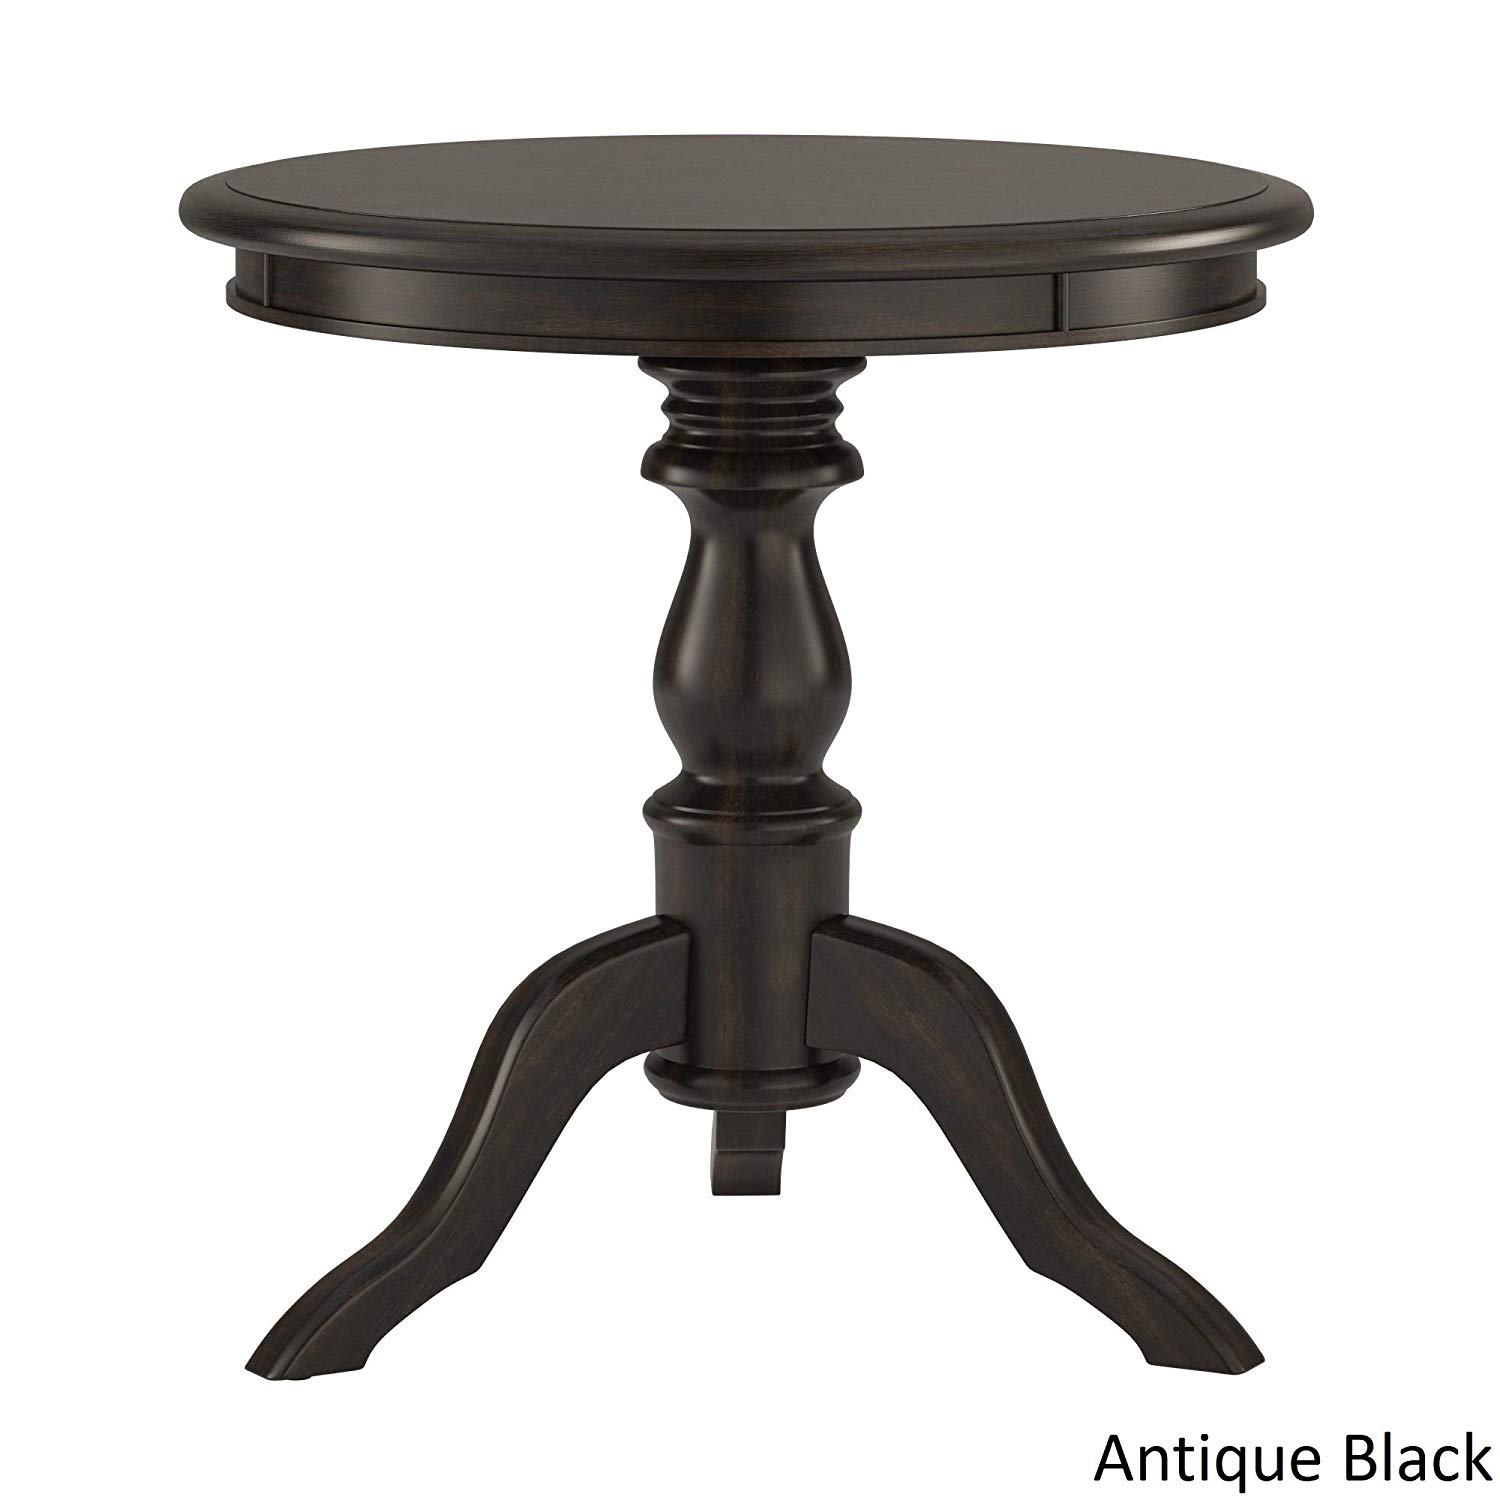 beckett antique wood pedestal accent table inspire black classic kitchen dining mirrored bedside indoor outdoor tablecloth centre for drawing room modern linens with storage pier